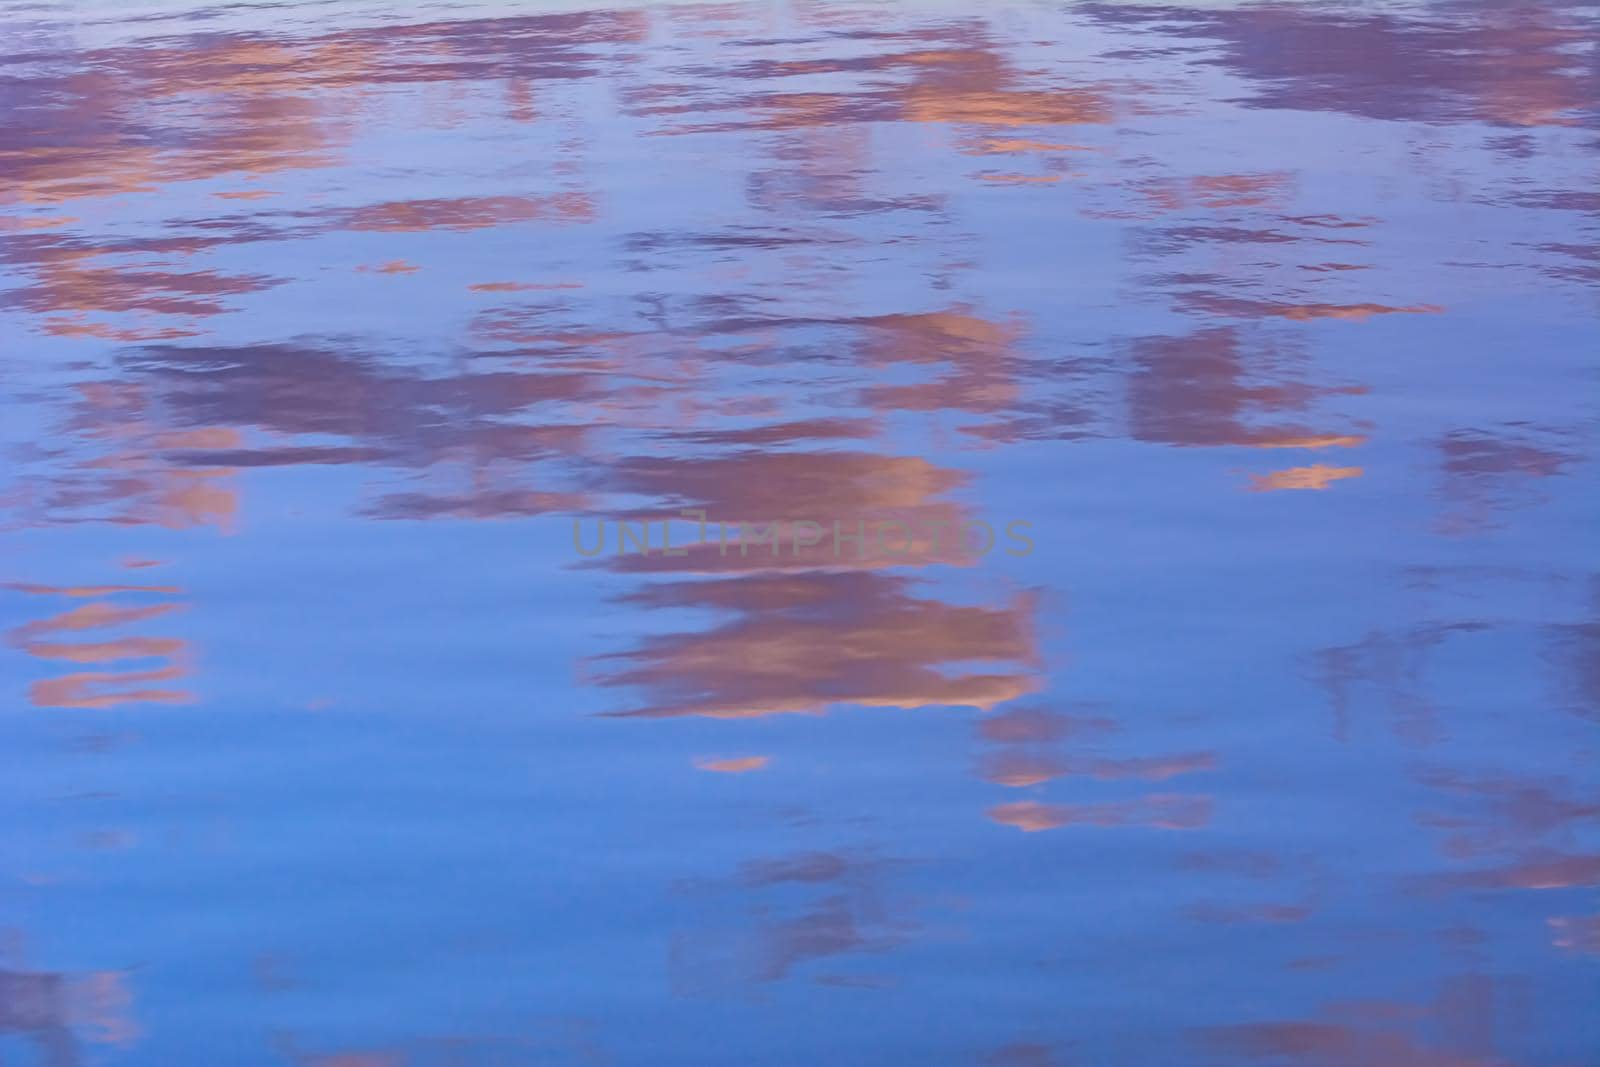 Sky reflection on the water surface